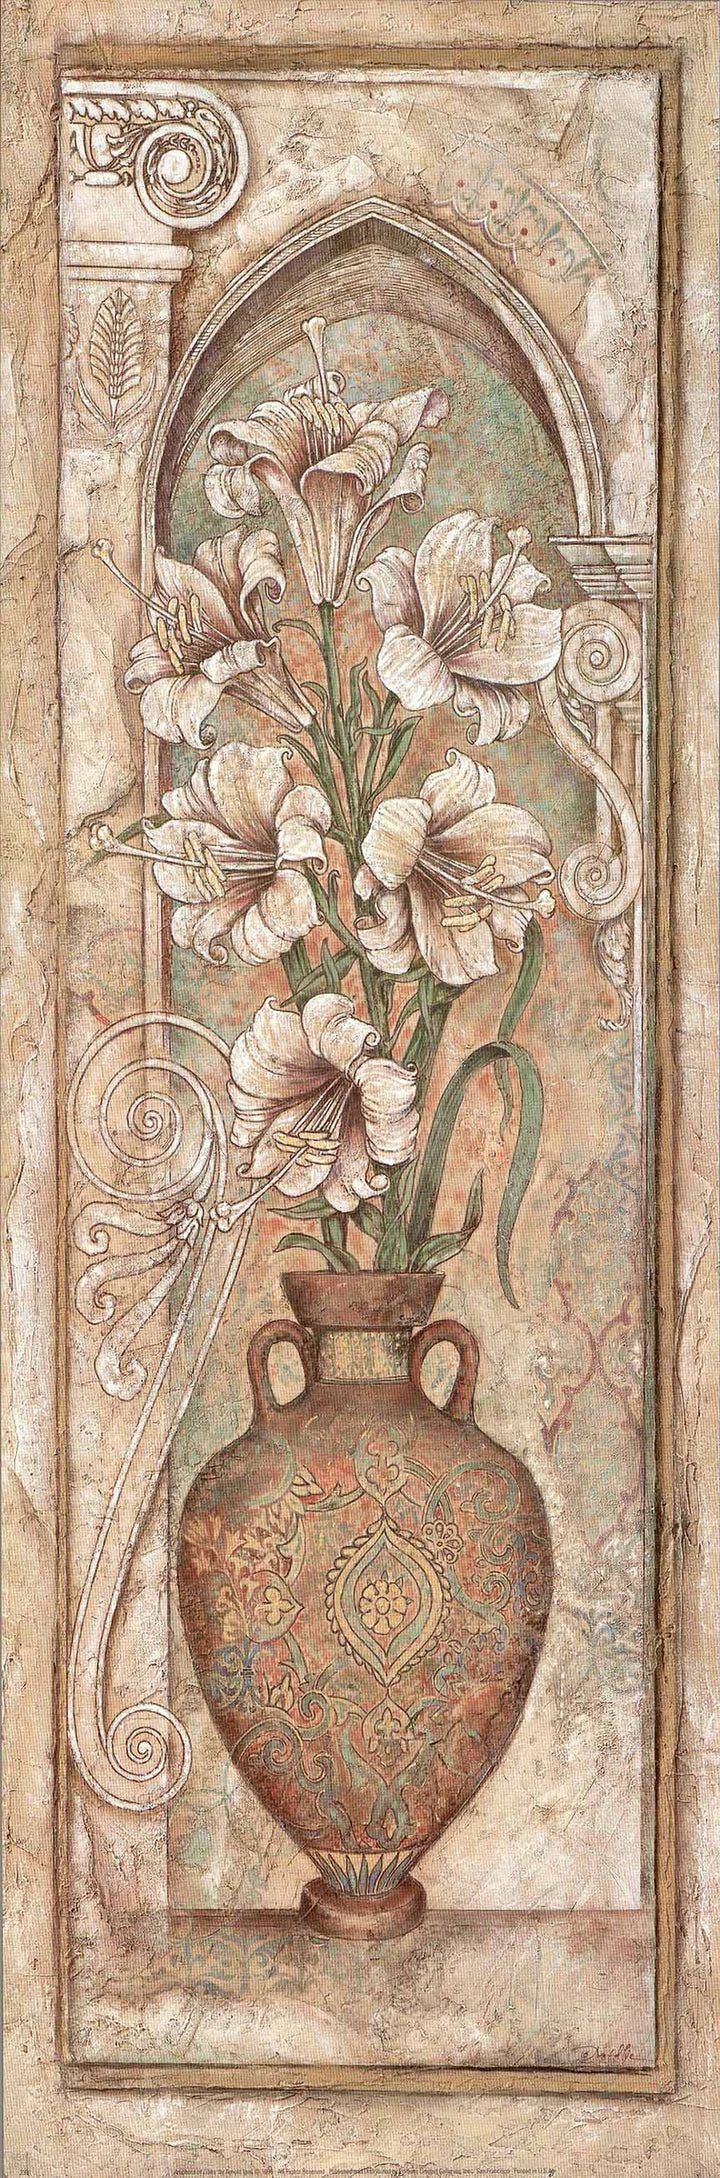 Amphora of Lilies by Arnold Iger - 12 X 36 Inches (Art Print)